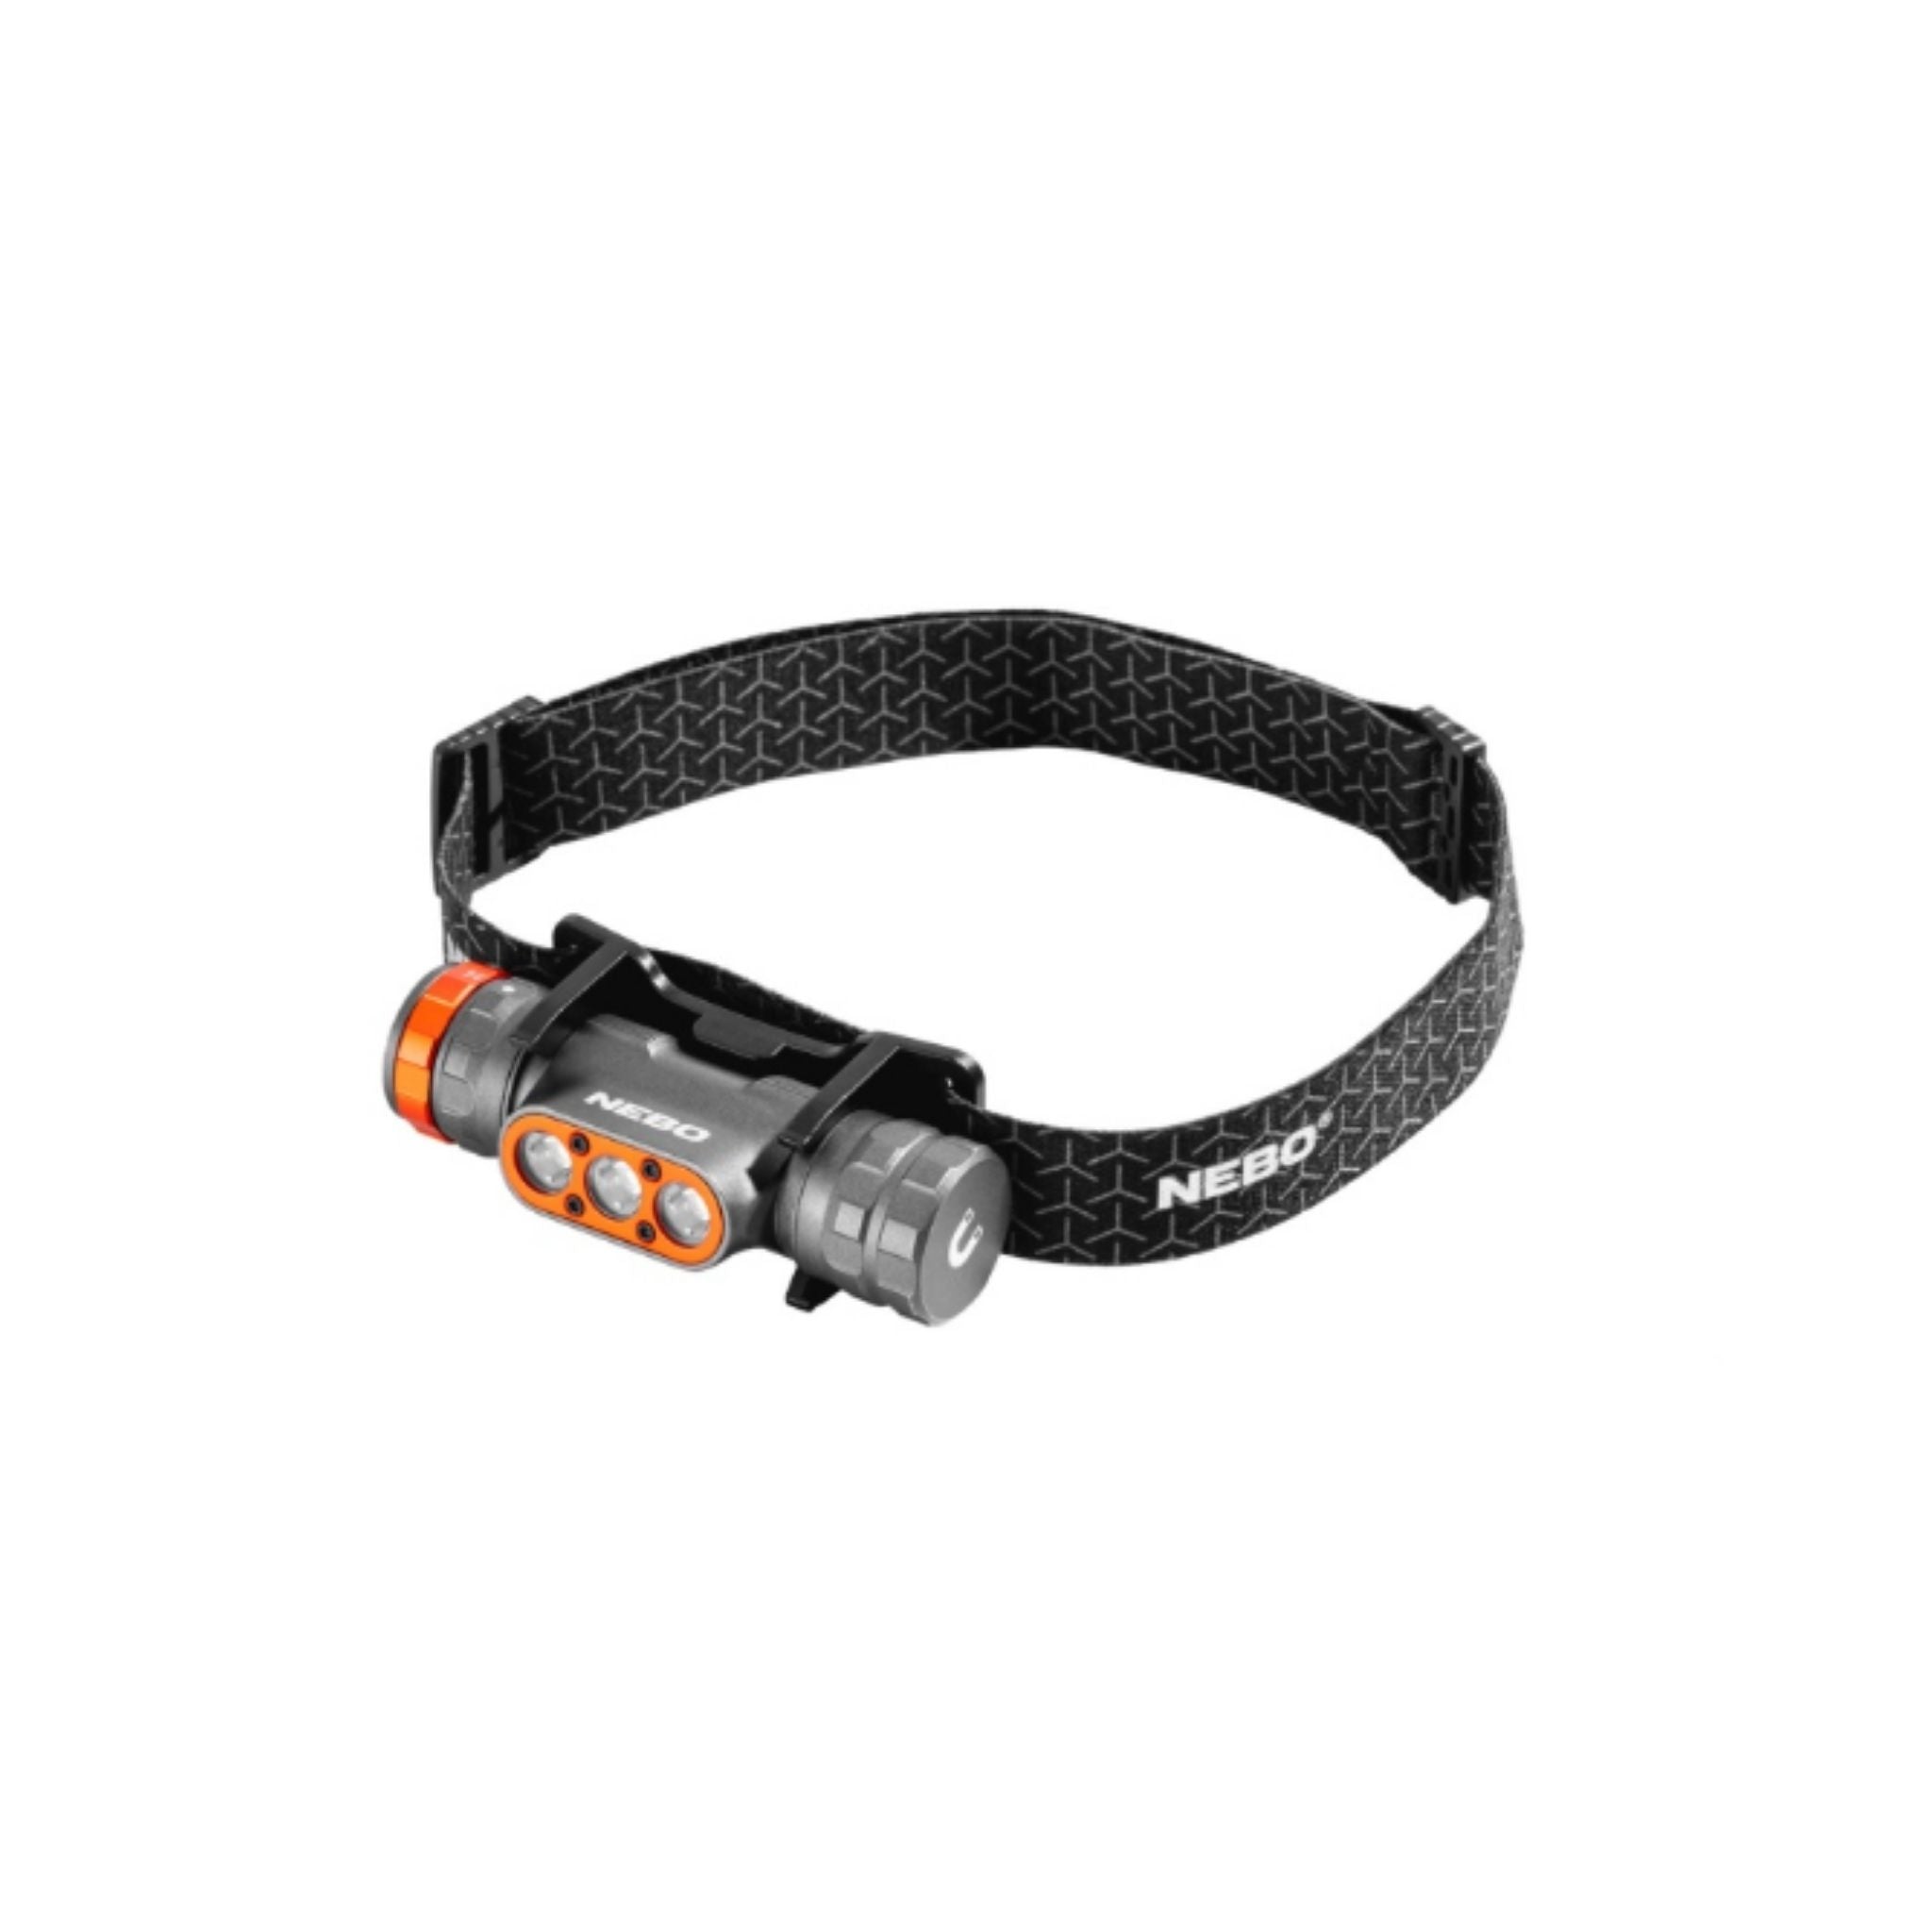 Nebo Transend 1500 Rechargeable Headlamp | Nebo | Portwest - The Outdoor Shop